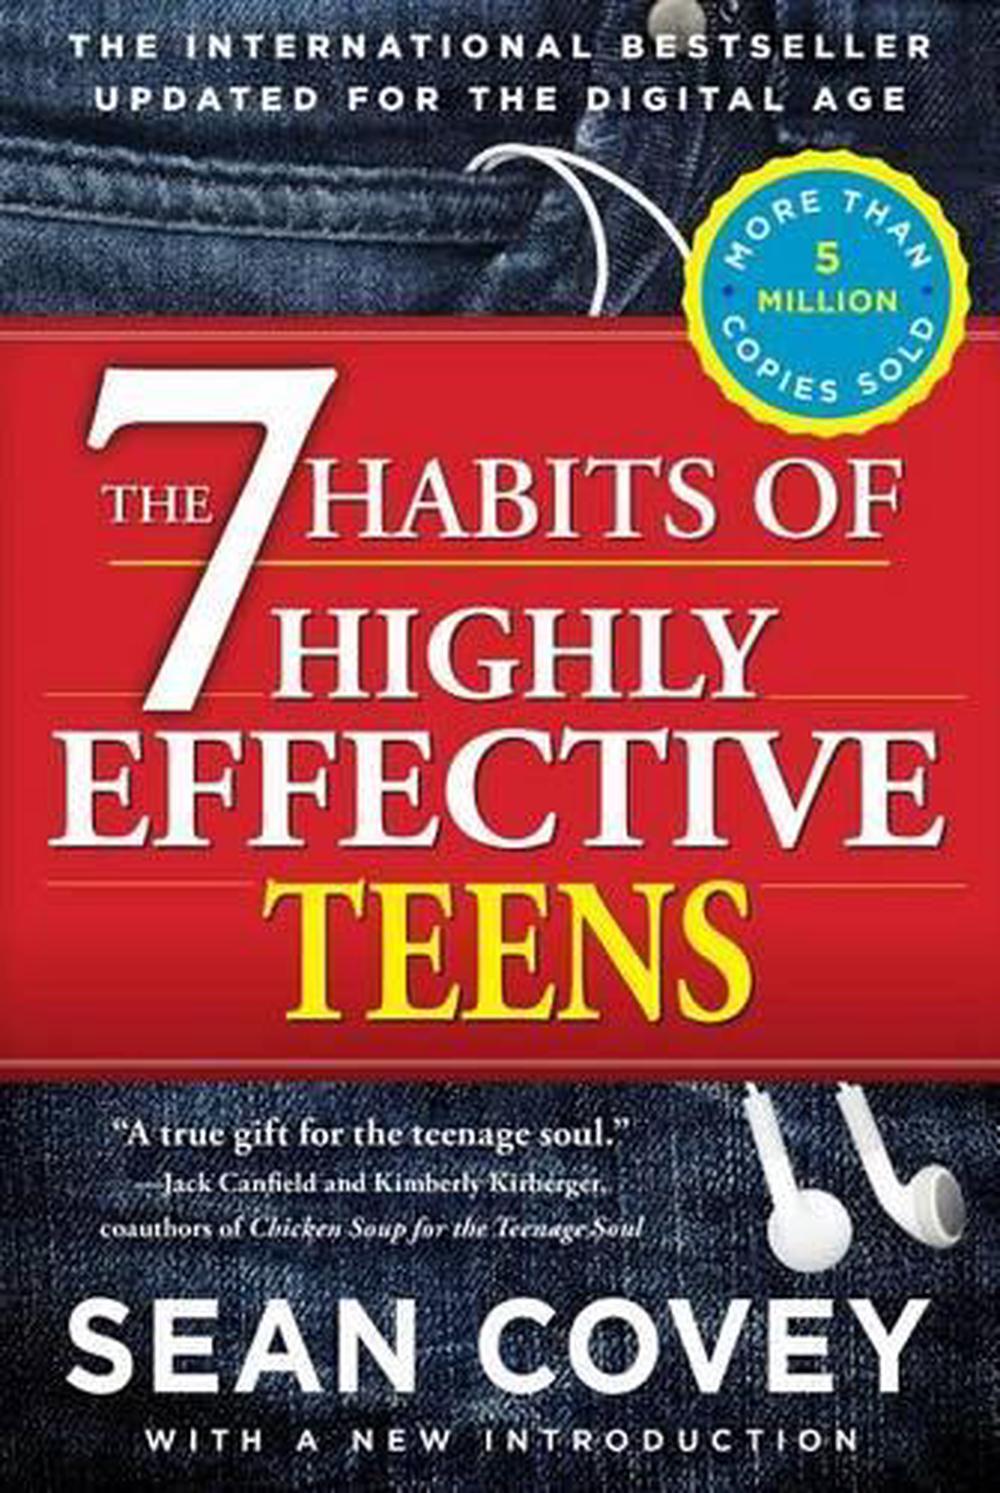 7 habits of highly effective people audio book